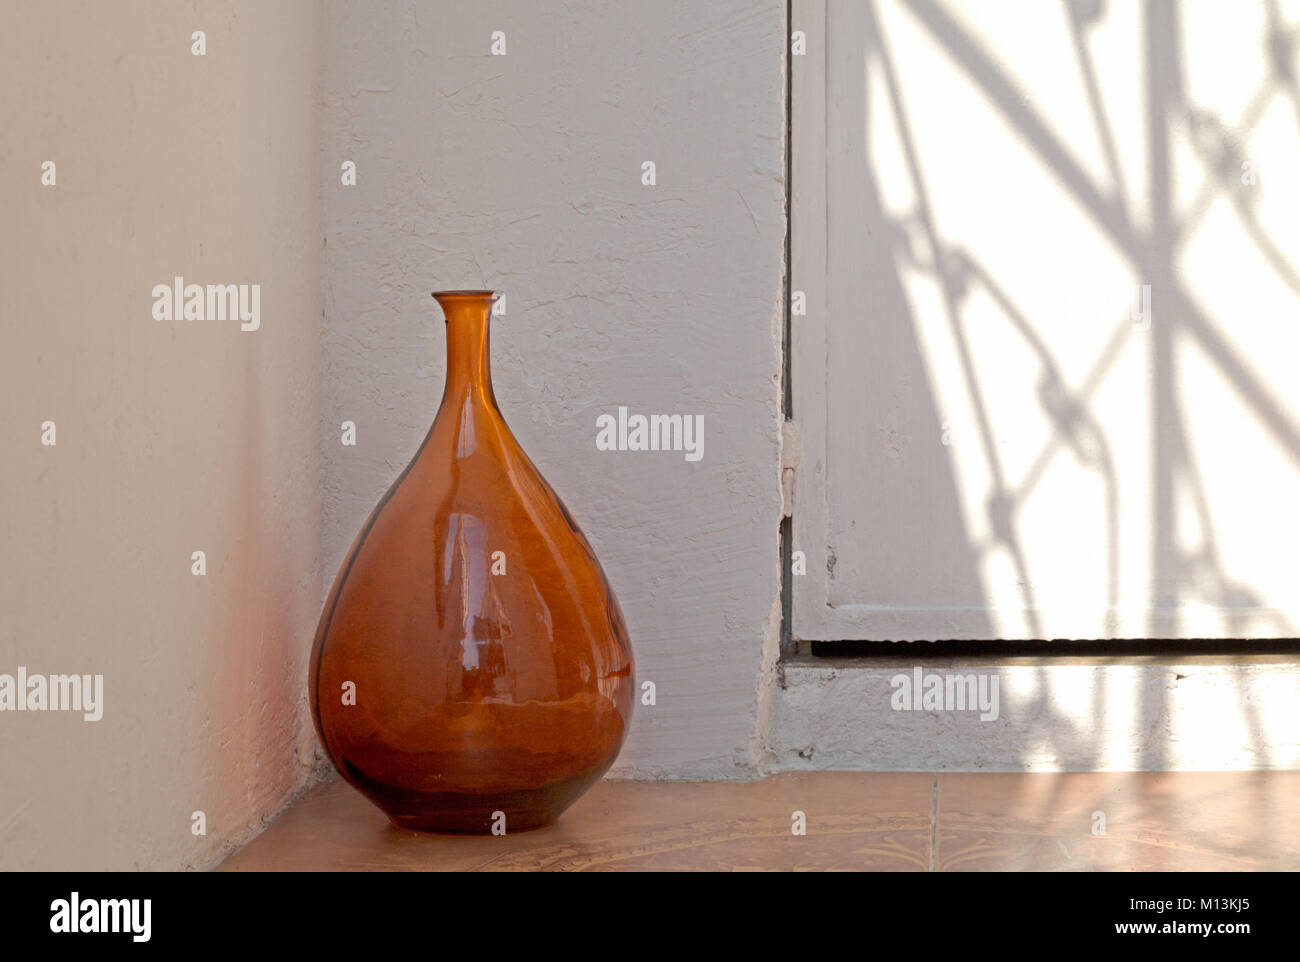 An orange brown colored glass vase sits corner of the shadow casting room, Mexico City, Mexico. Stock Photo